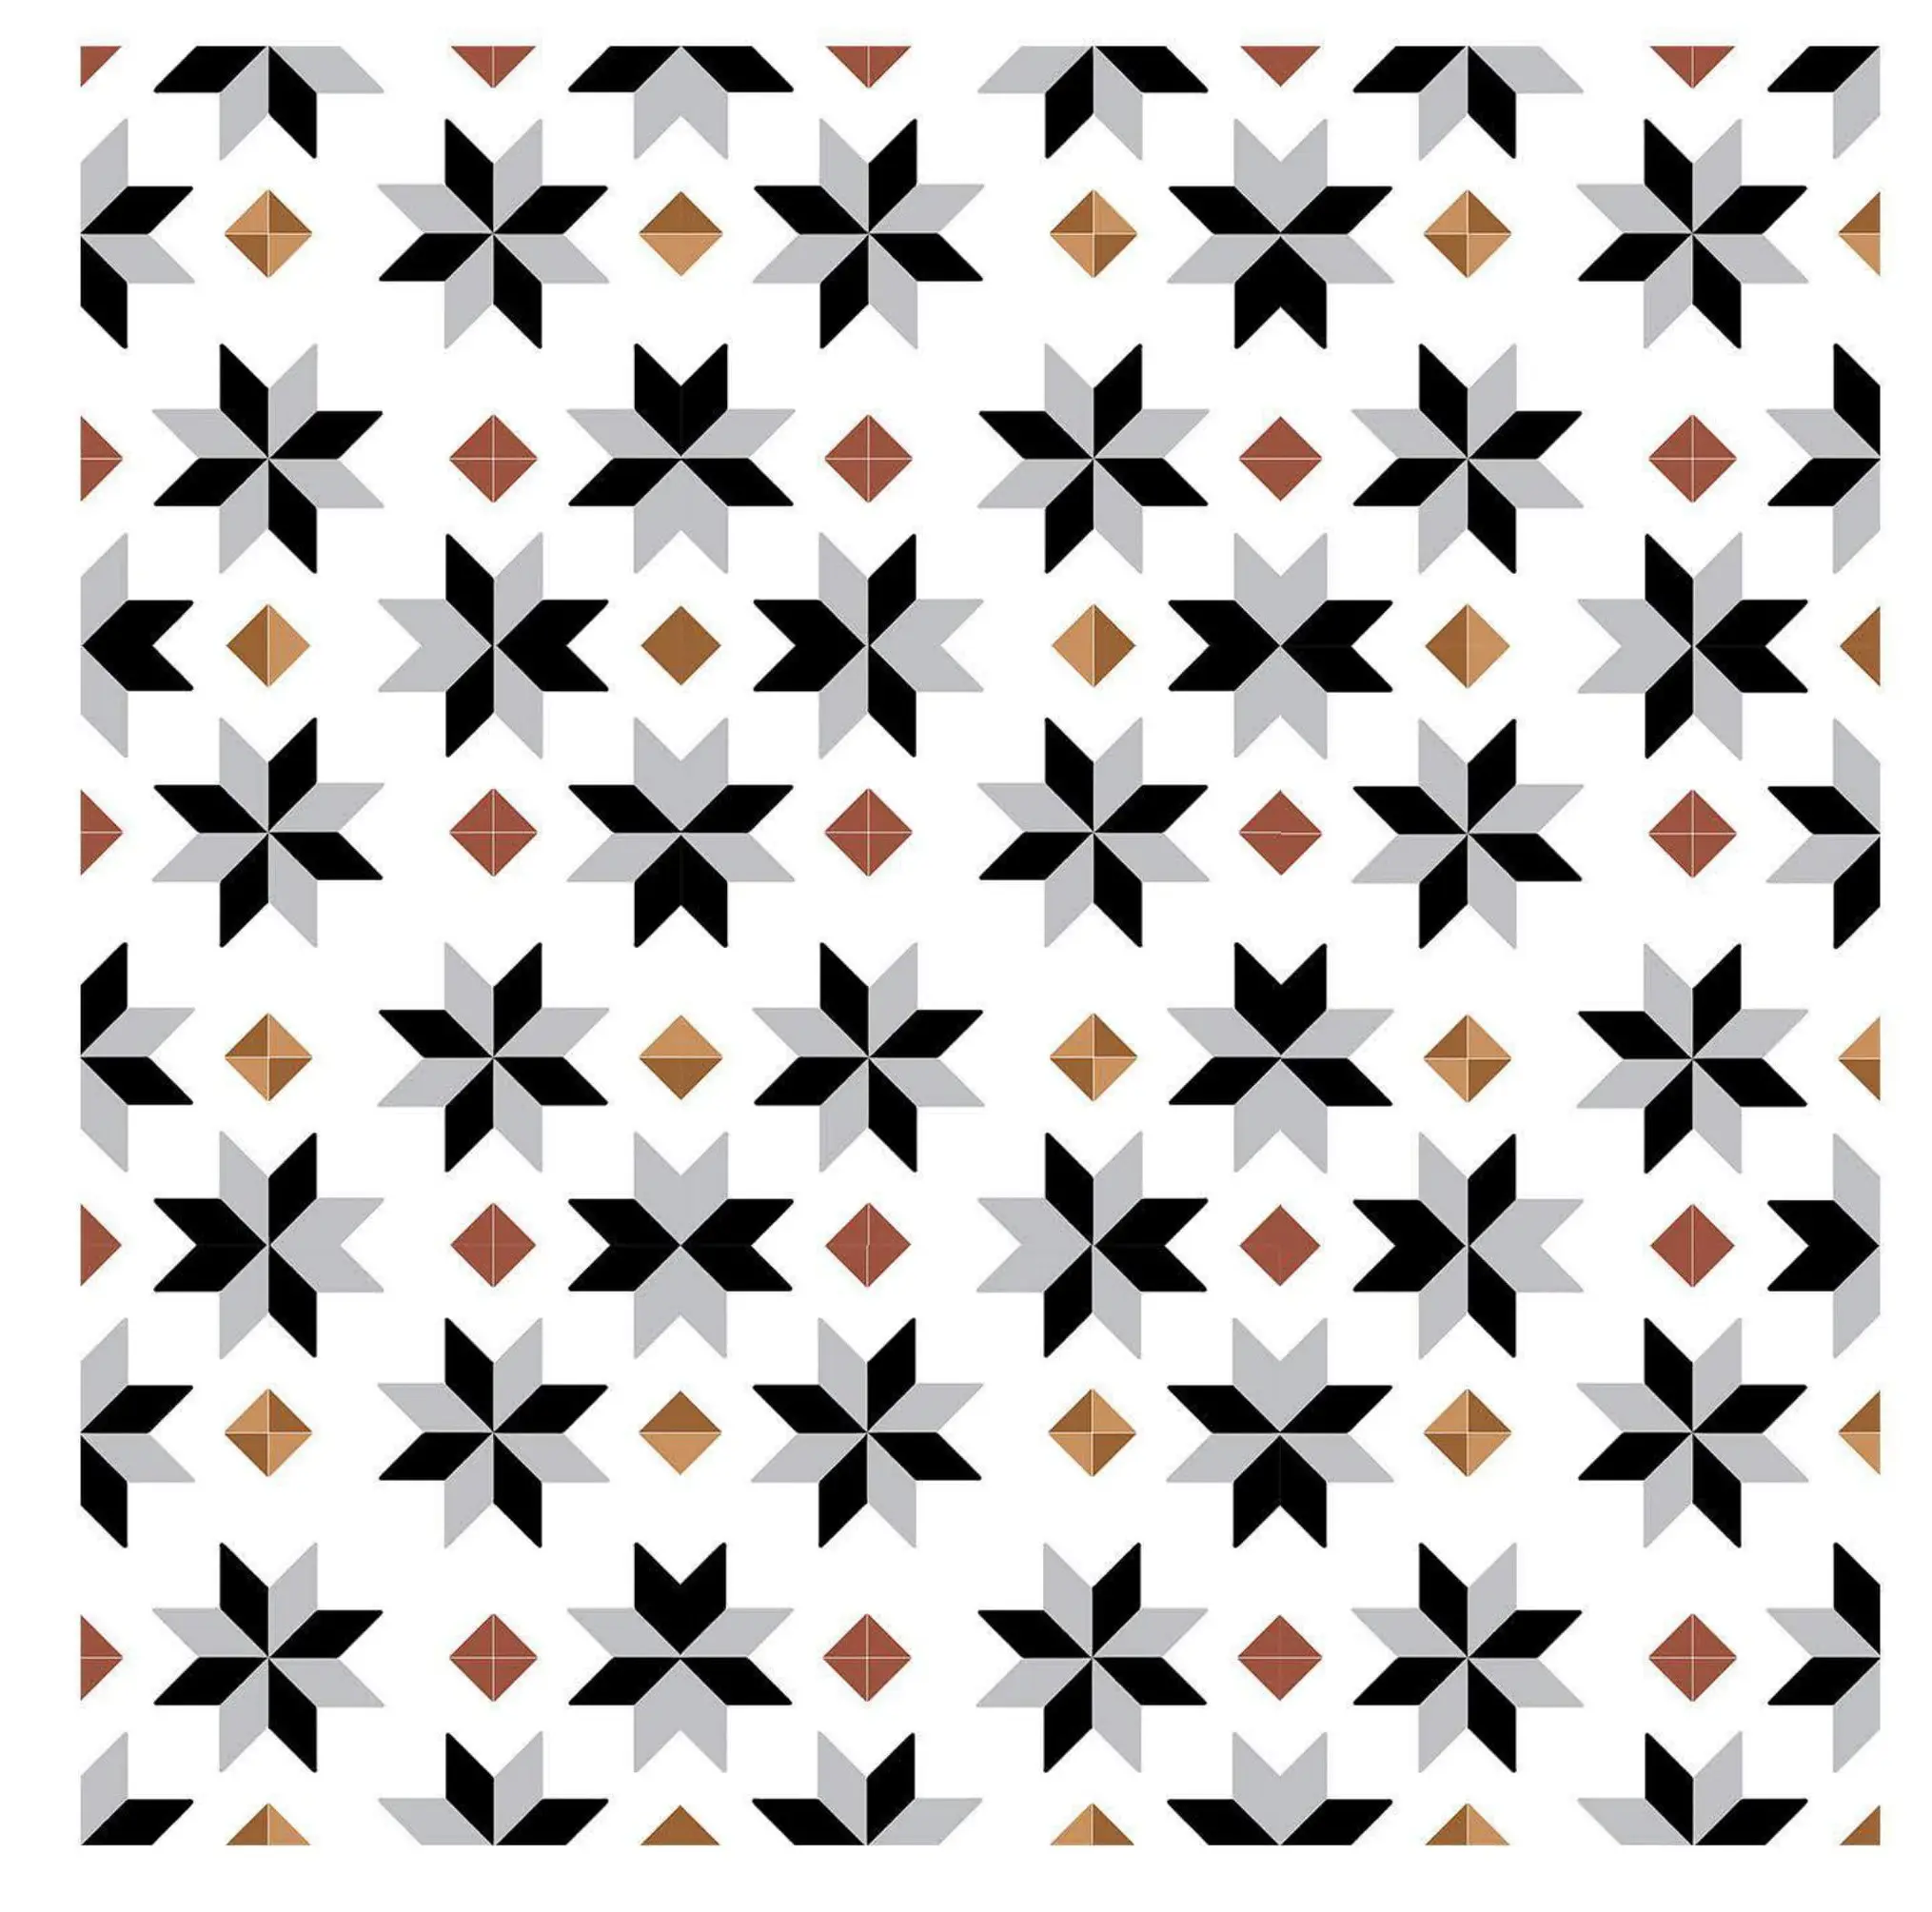 MOROCCAN SERIES 300x300 mm DIGITAL FLOOR TILES IN MADE FROM CLAY AND OTHER NATURAL RESOURCES WHICH MAKE ECO-FRIENDLY